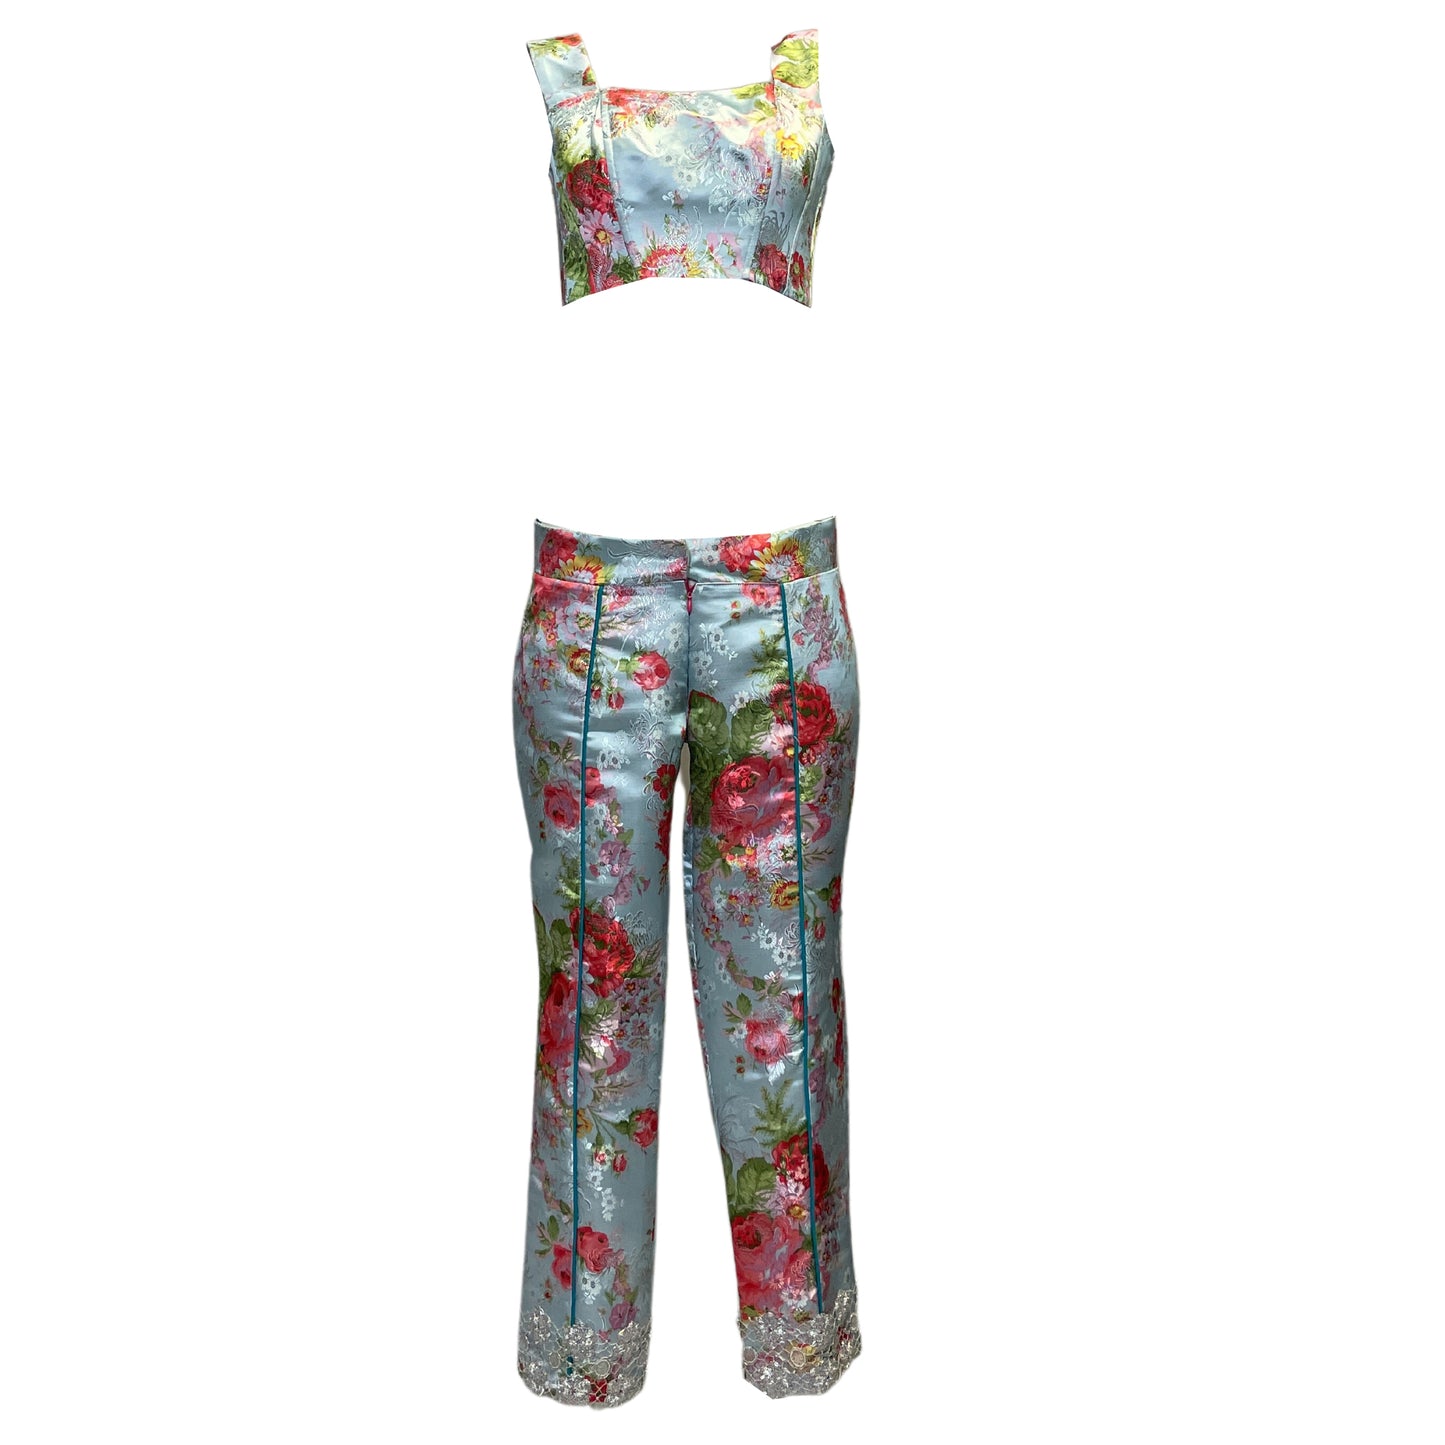 JACQUARD SUITE EMBROIDERED CORSET TOP AND PANTS